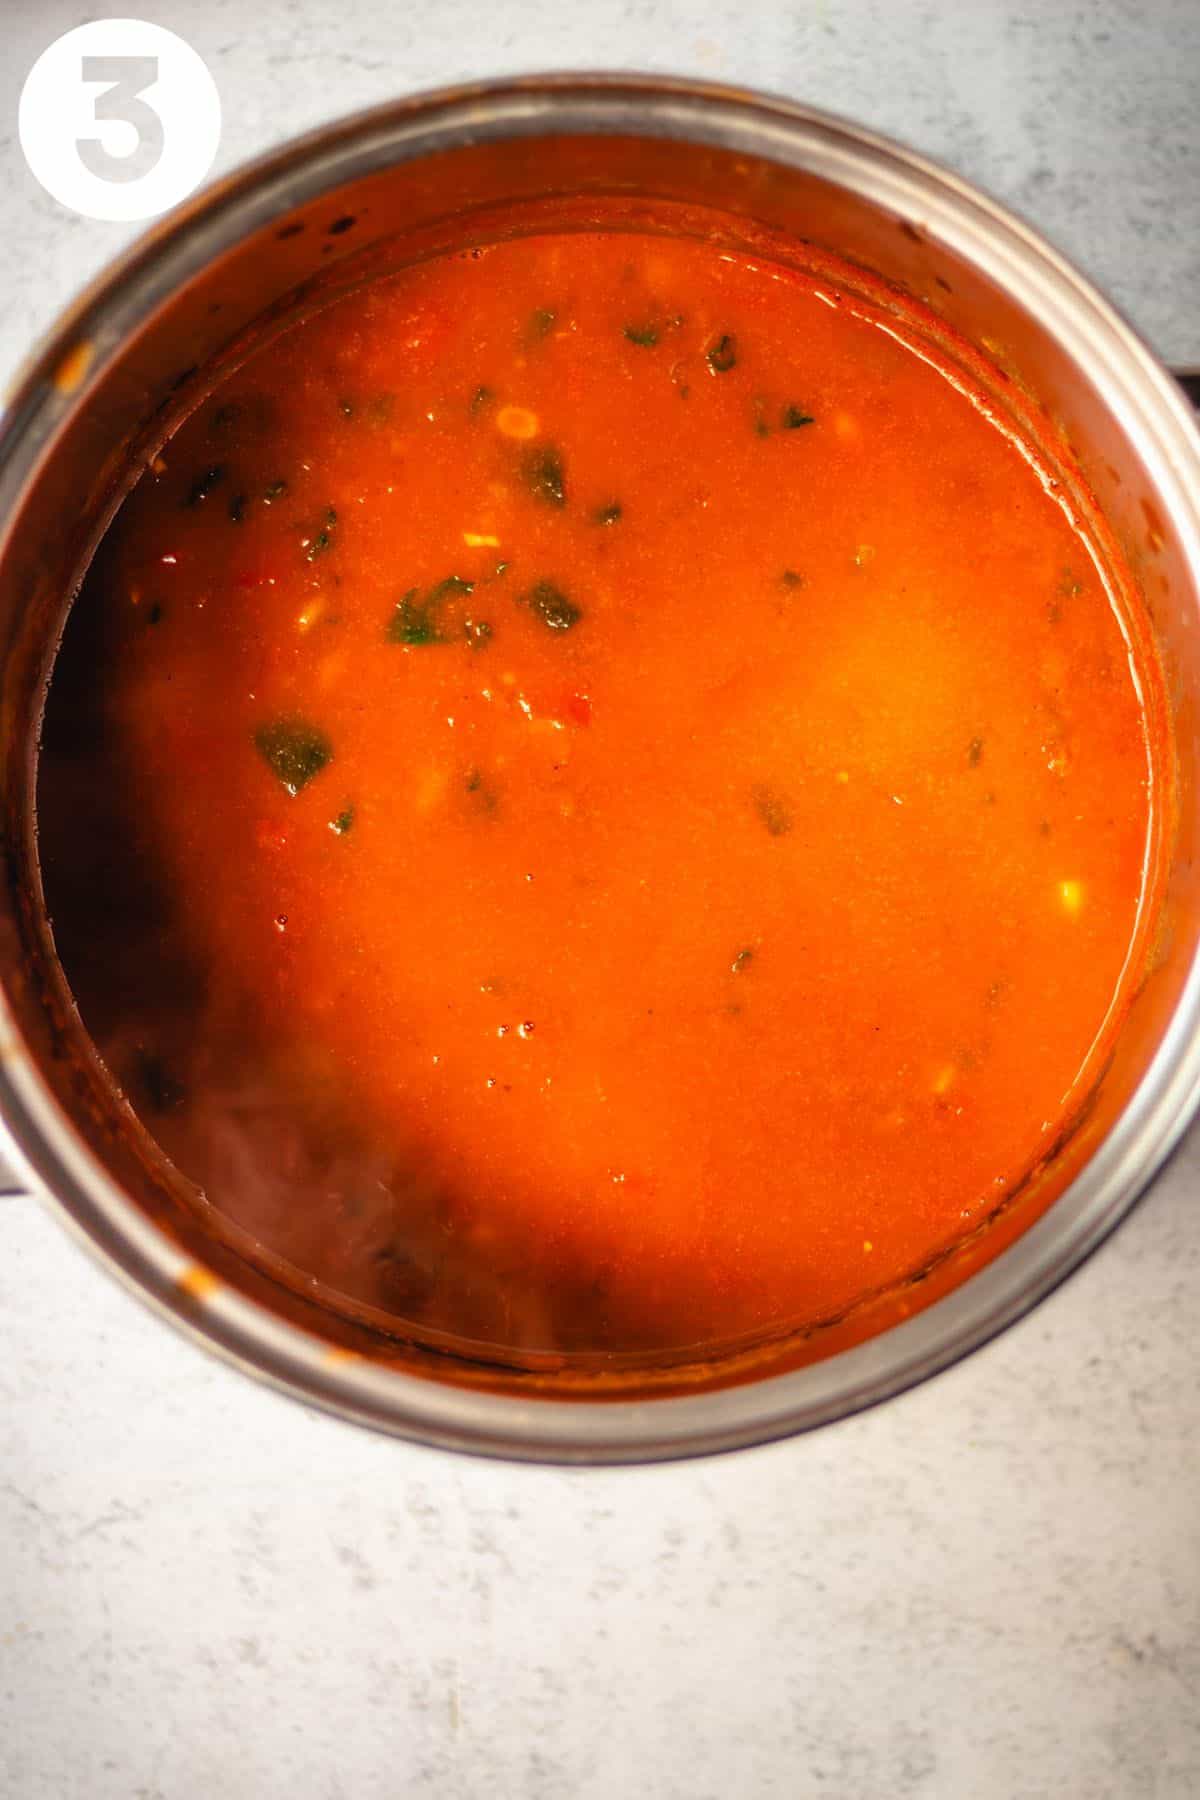 Cooking taco soup in a large pot labeled with a number "3" in the upper left corner.